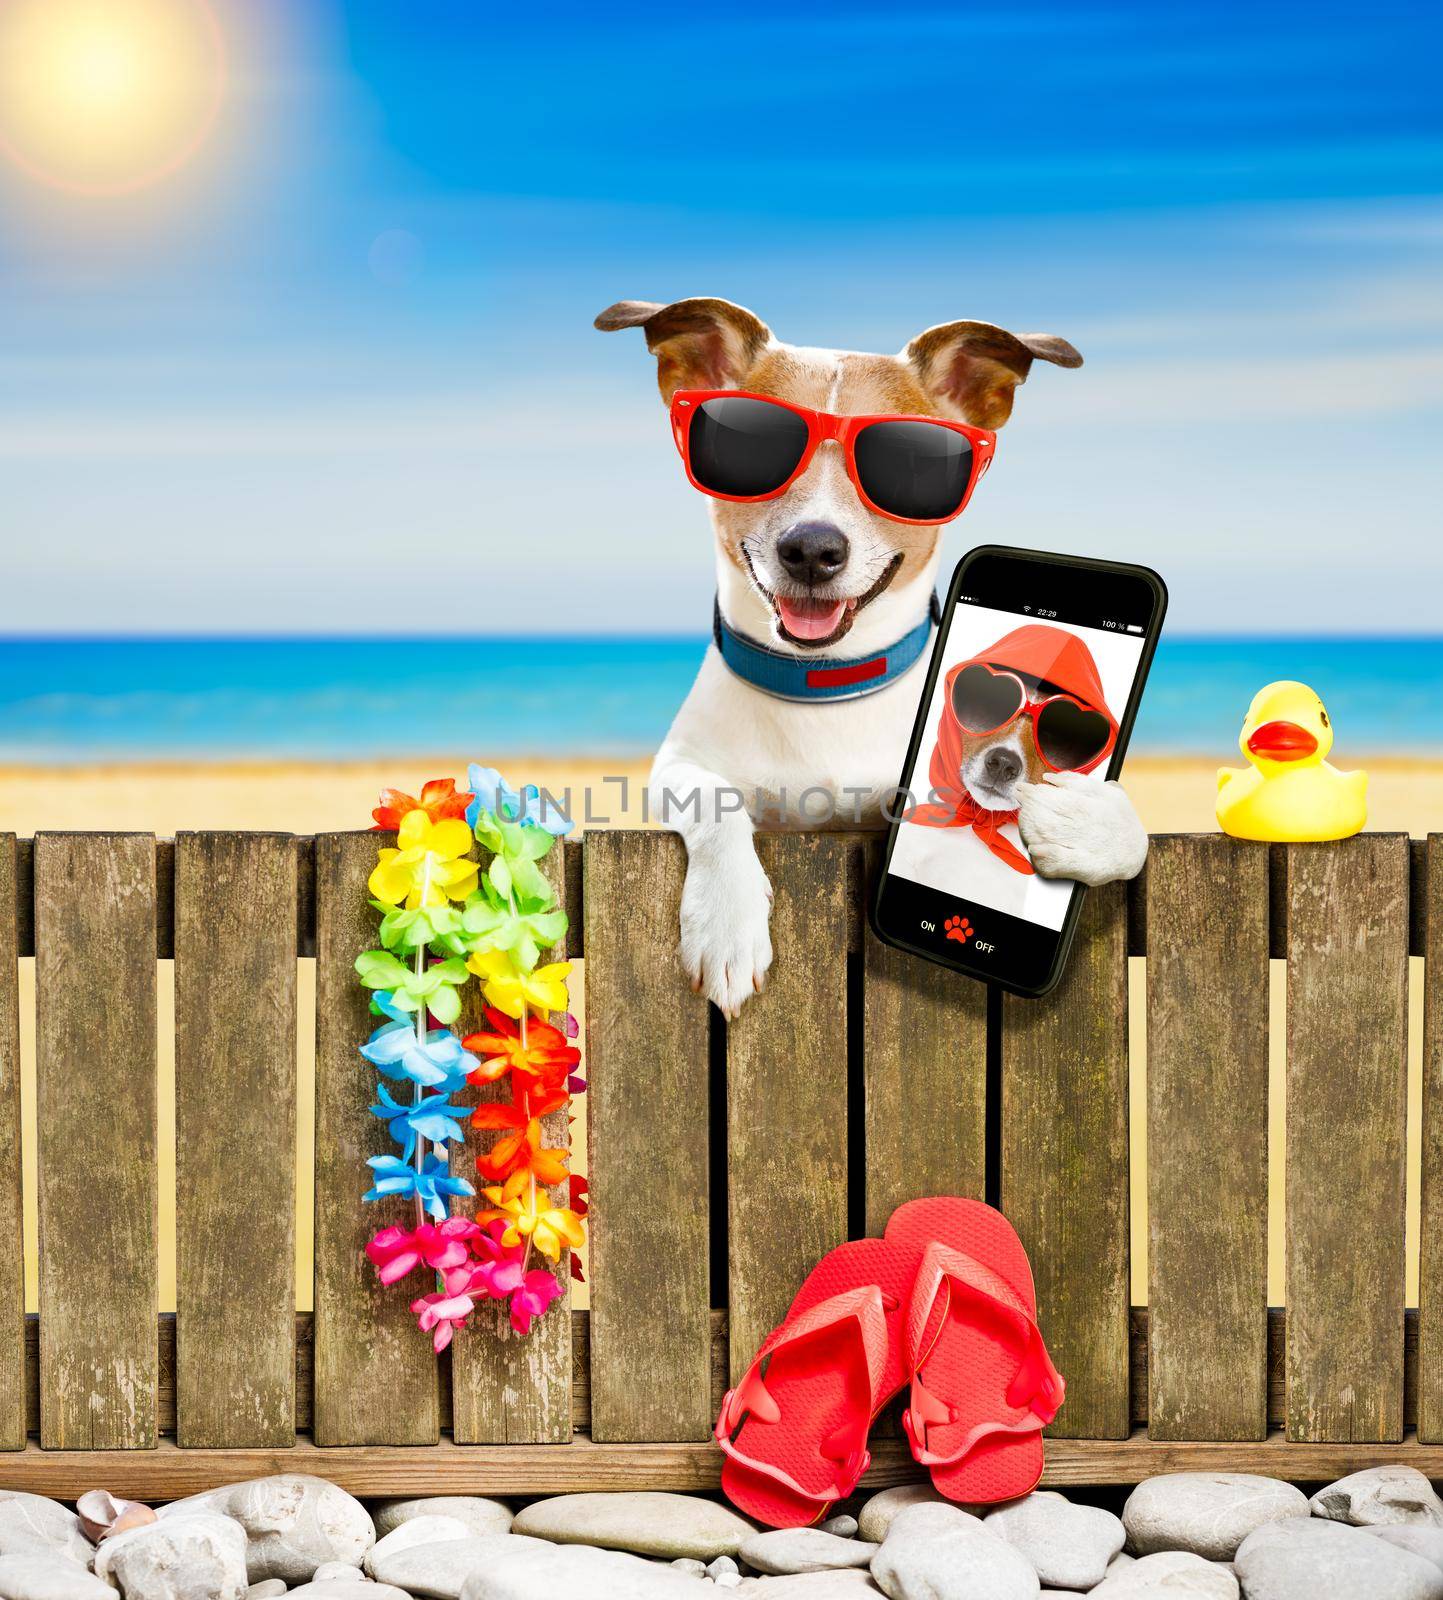 jack russel dog resting and relaxing on a wall or fence at the  beach  ocean shore, on summer vacation holidays, wearing sunglasses, taking  a selfie with smartphone or mobile phone